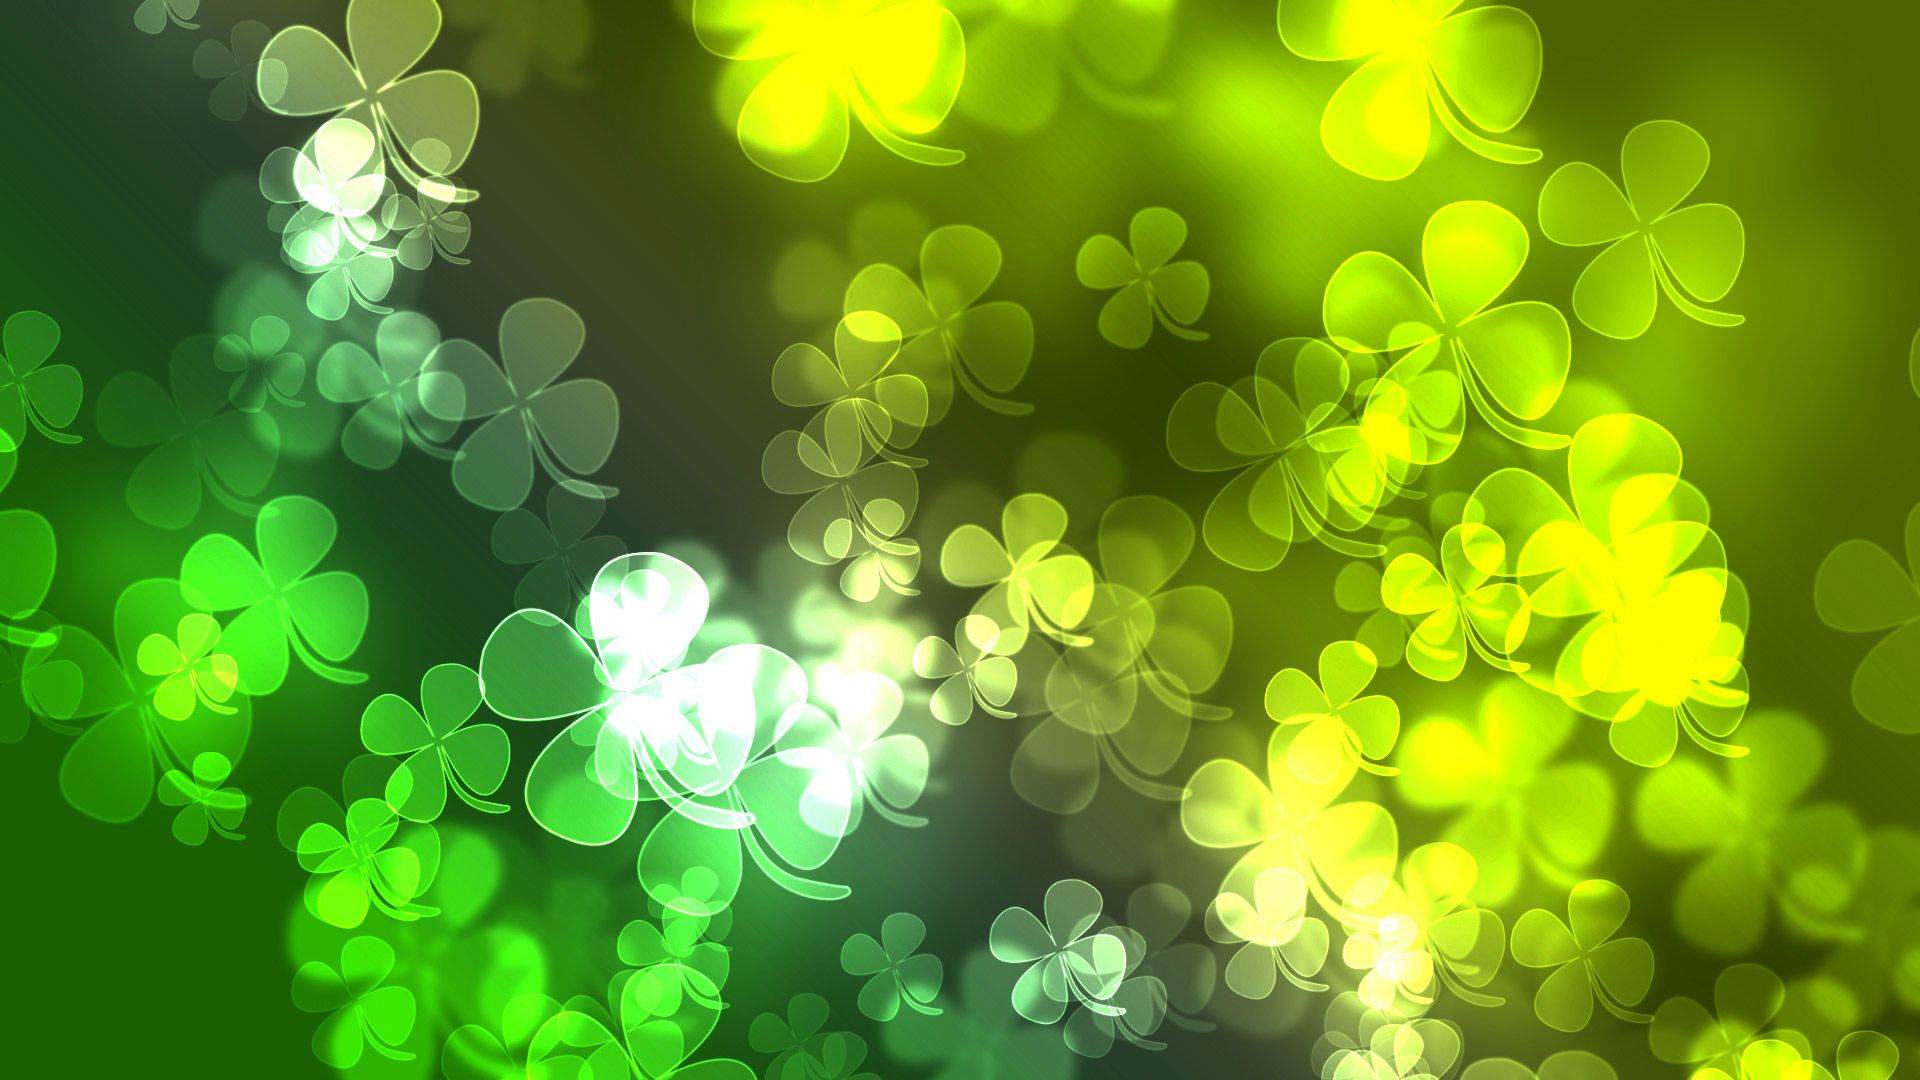 23 St. Patrick's Day themed wallpapers for your Android | AndroidGuys